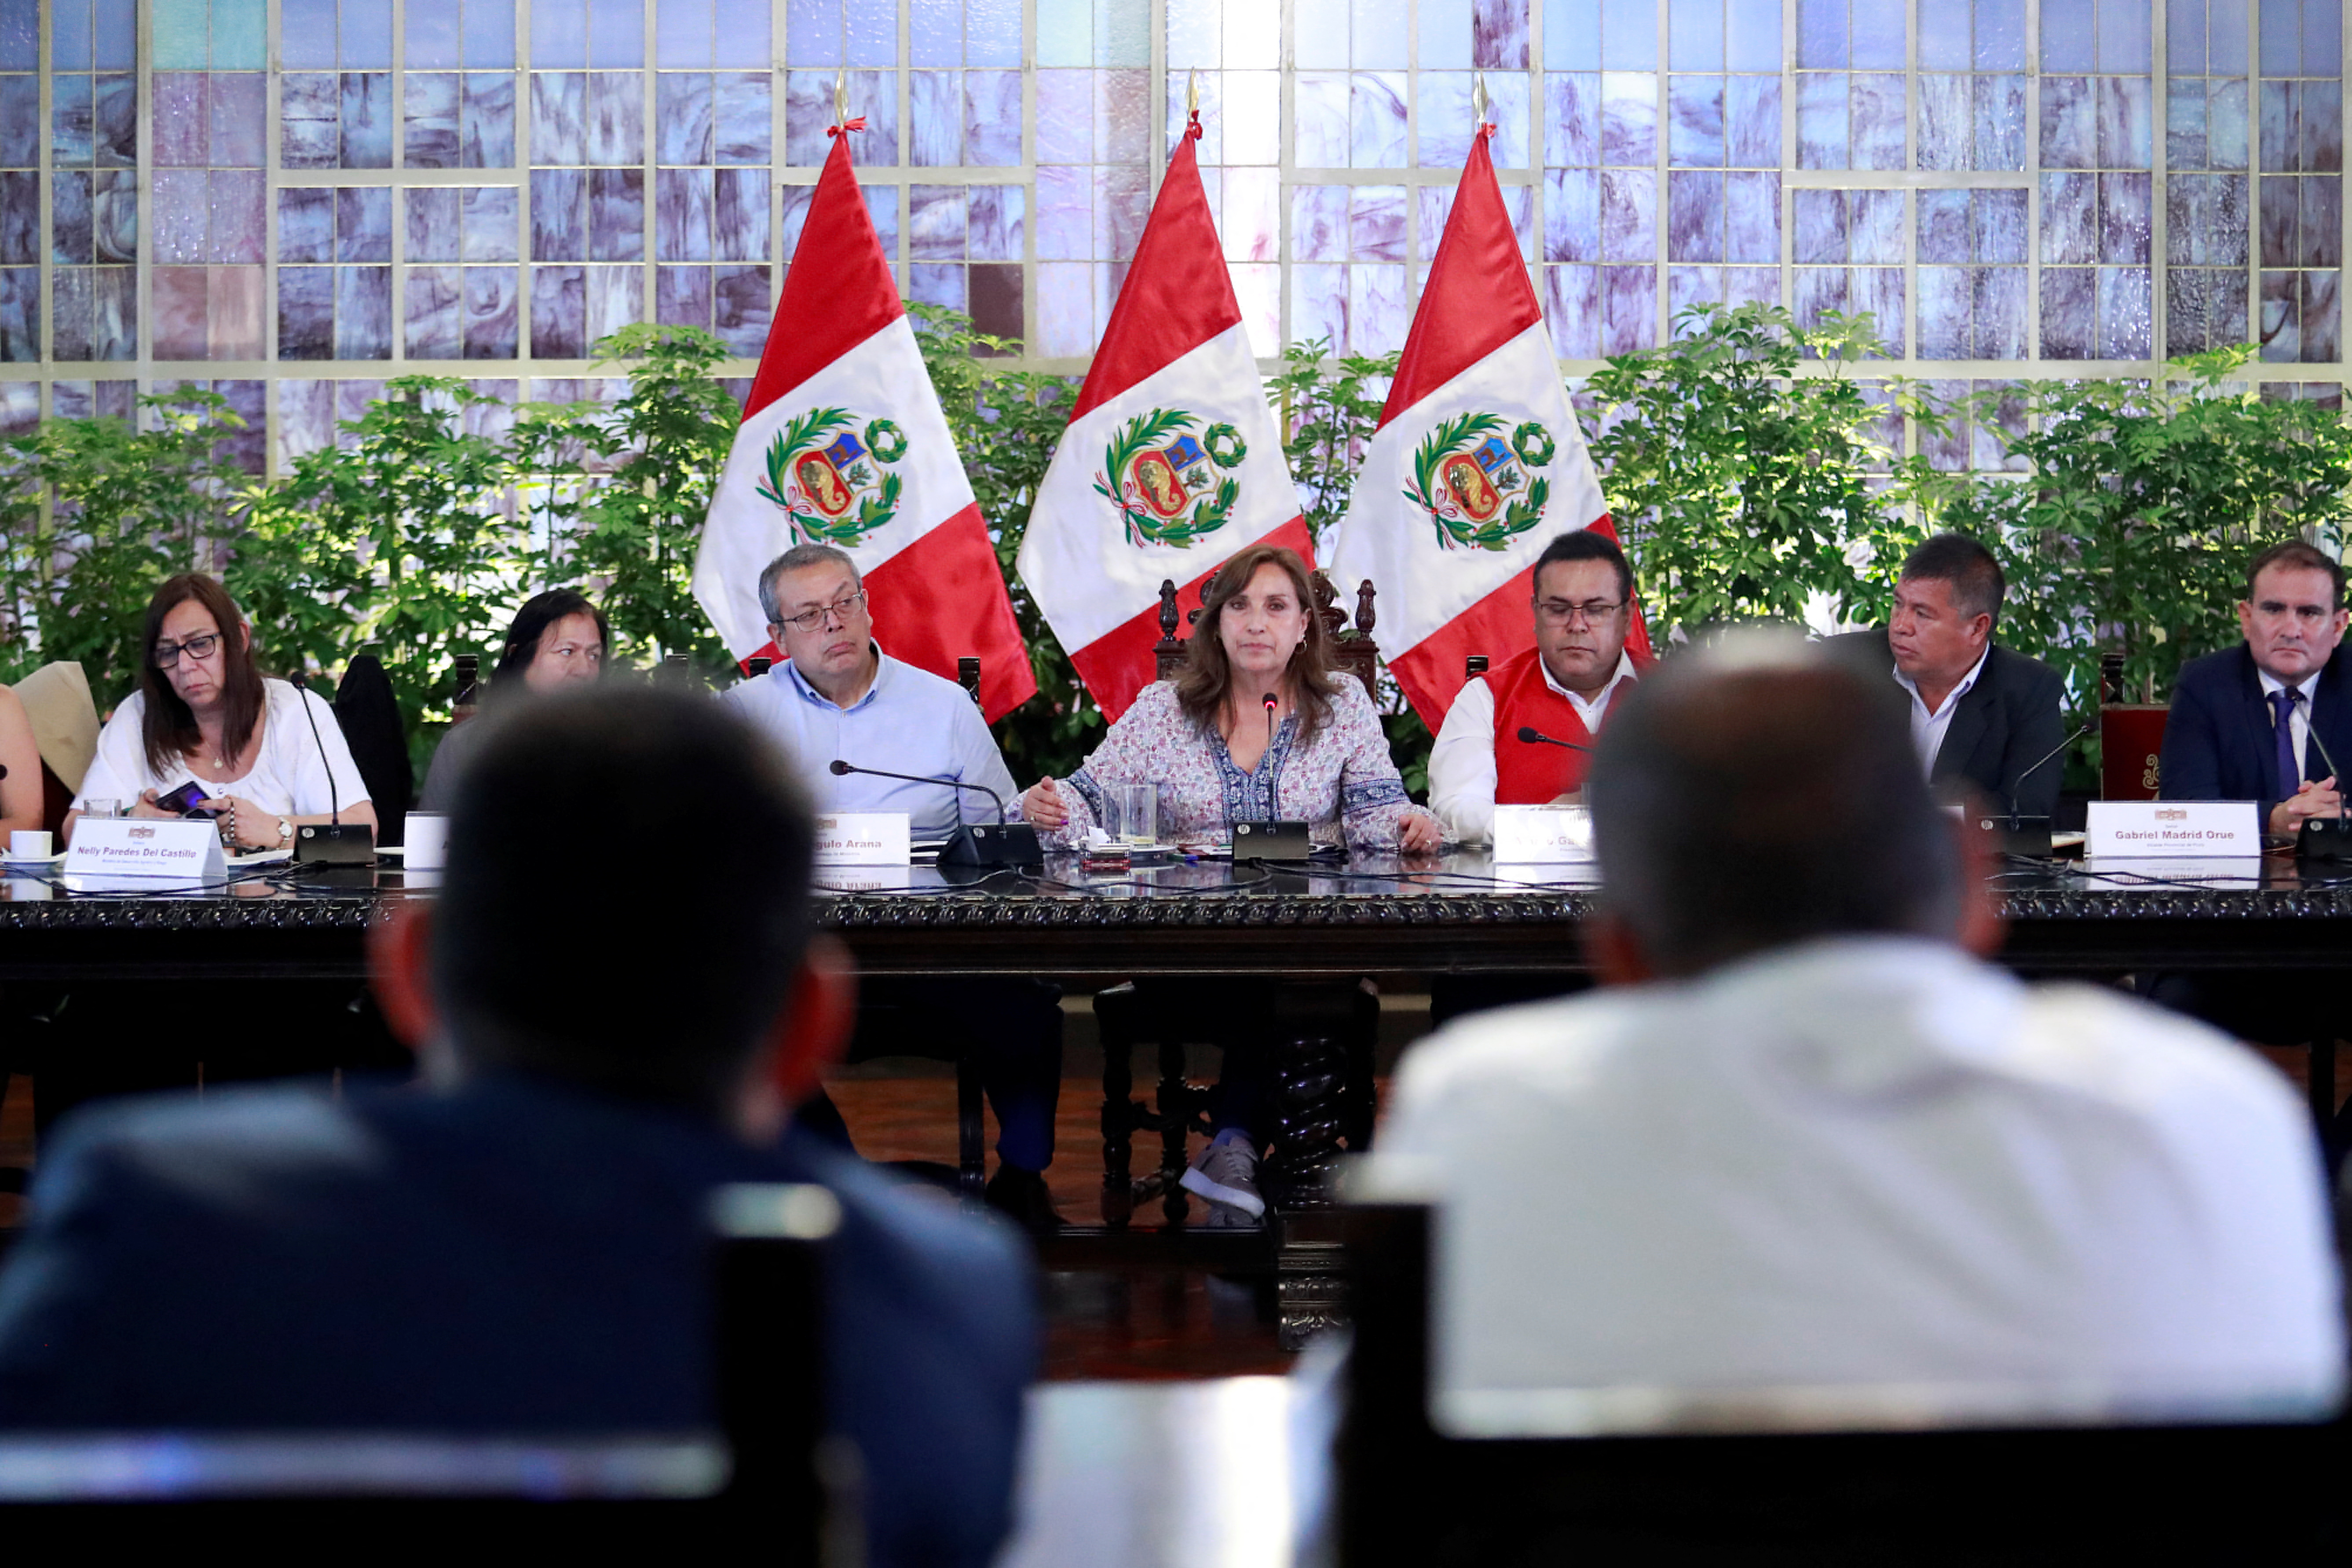 Peru's President Dina Boluarte at a meeting with mayors and governors in Lima